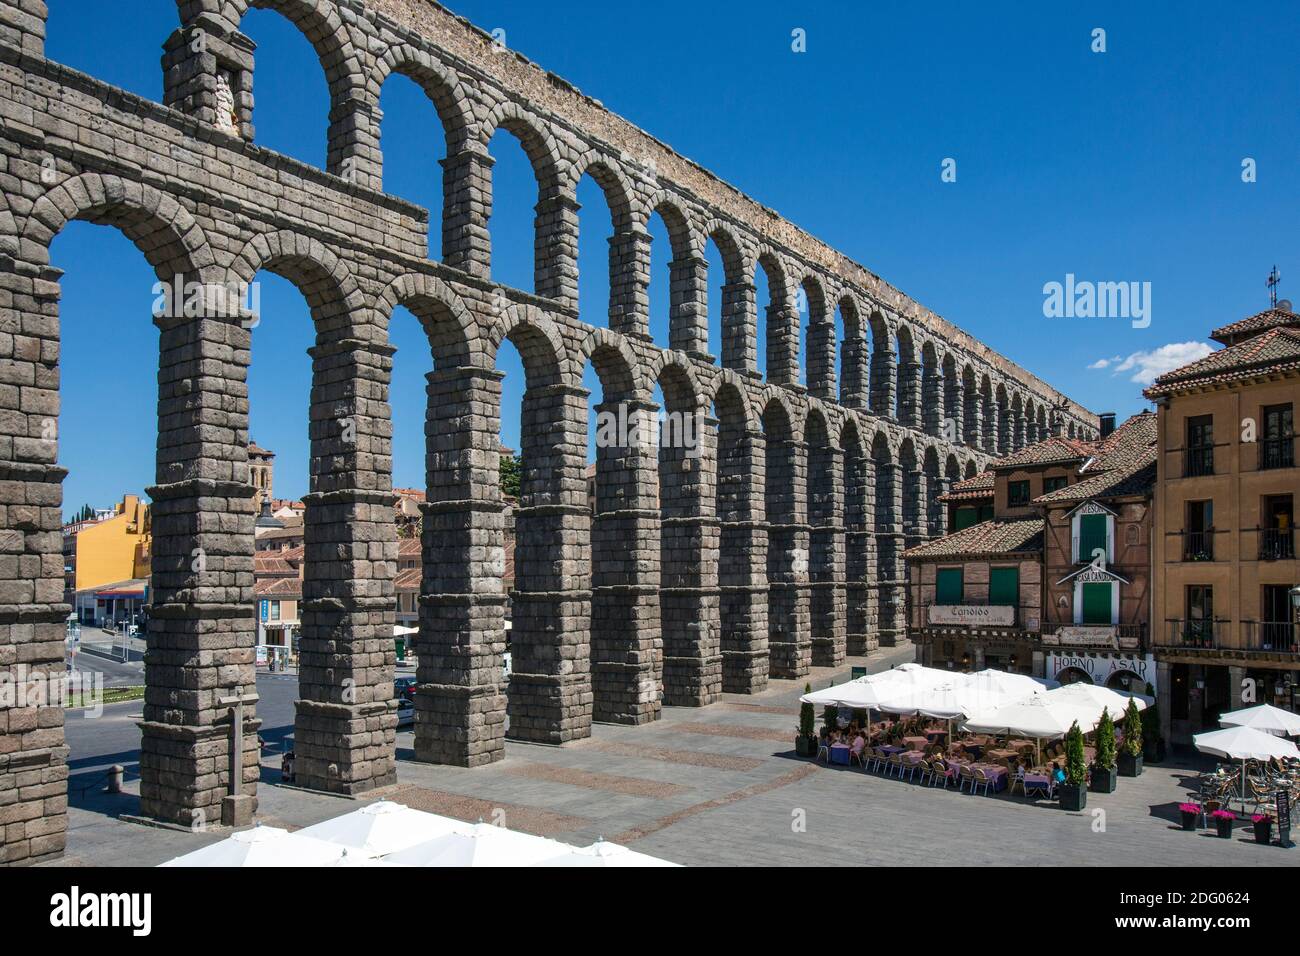 The Roman Aqueduct in the city of Segovia in the central Spain. UNESCO World Heritage Site. Stock Photo